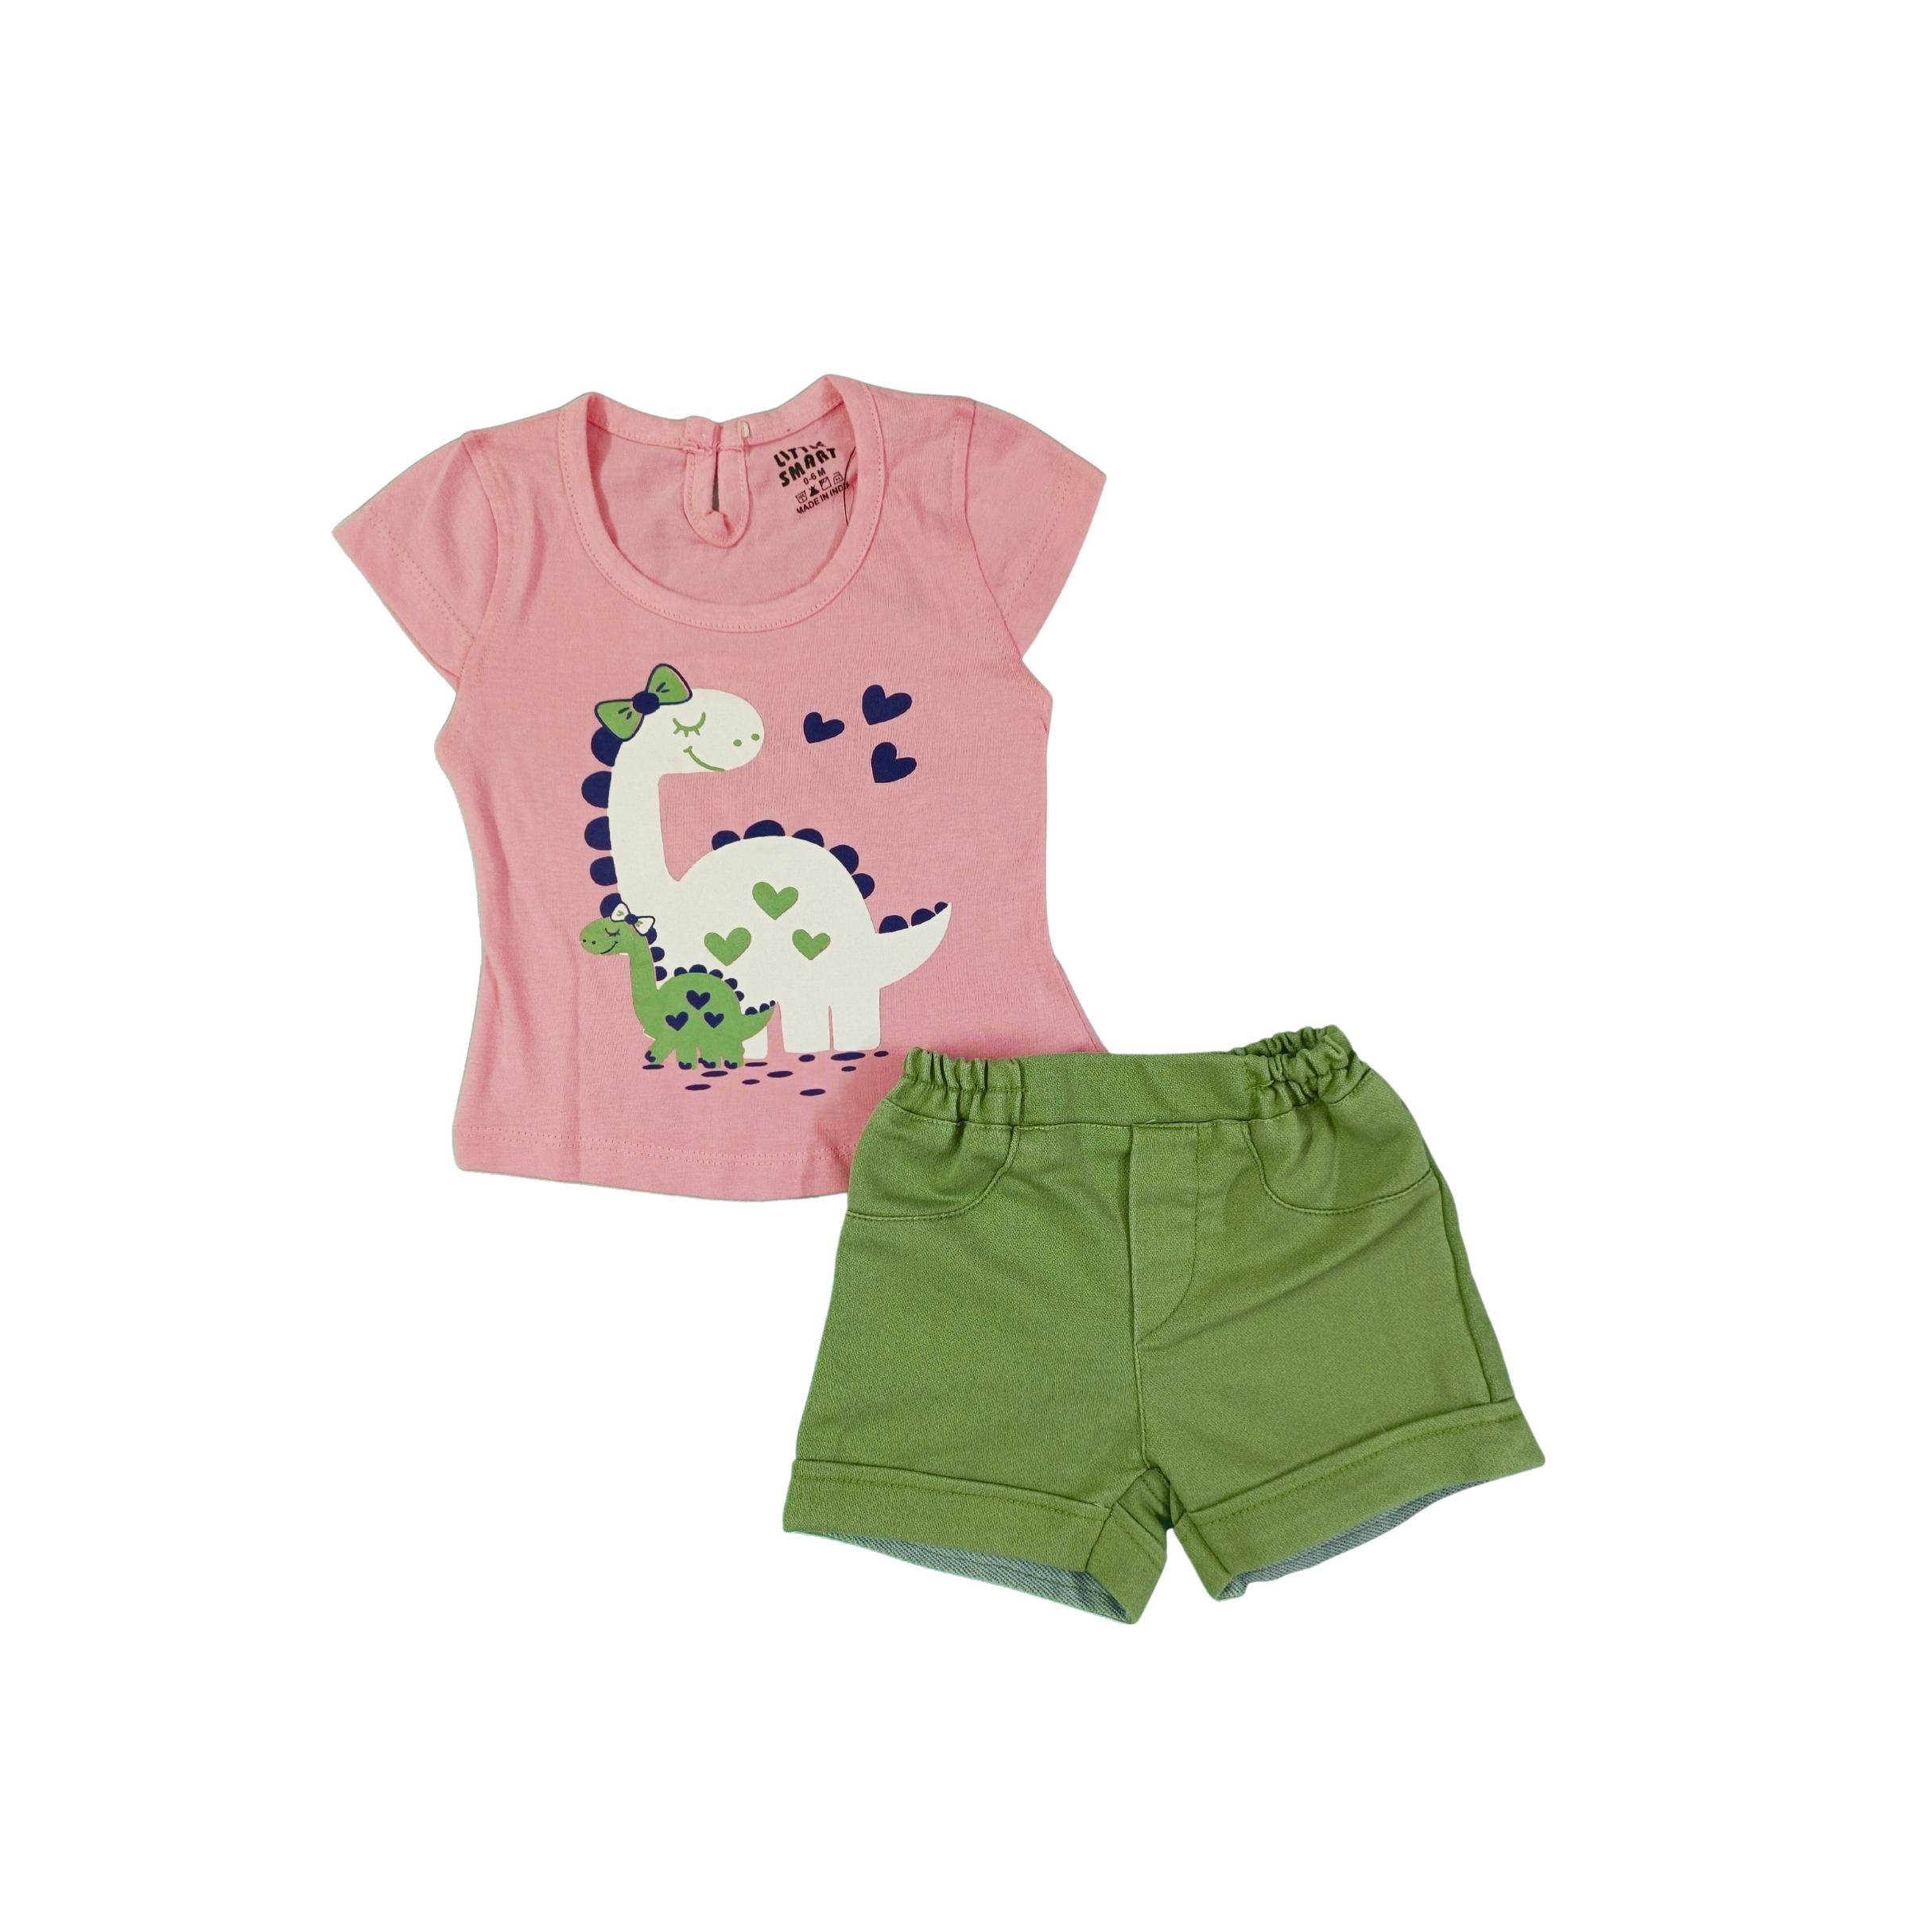 Baby Girl's Outfit - Cotton Top & Denim Shorts Set